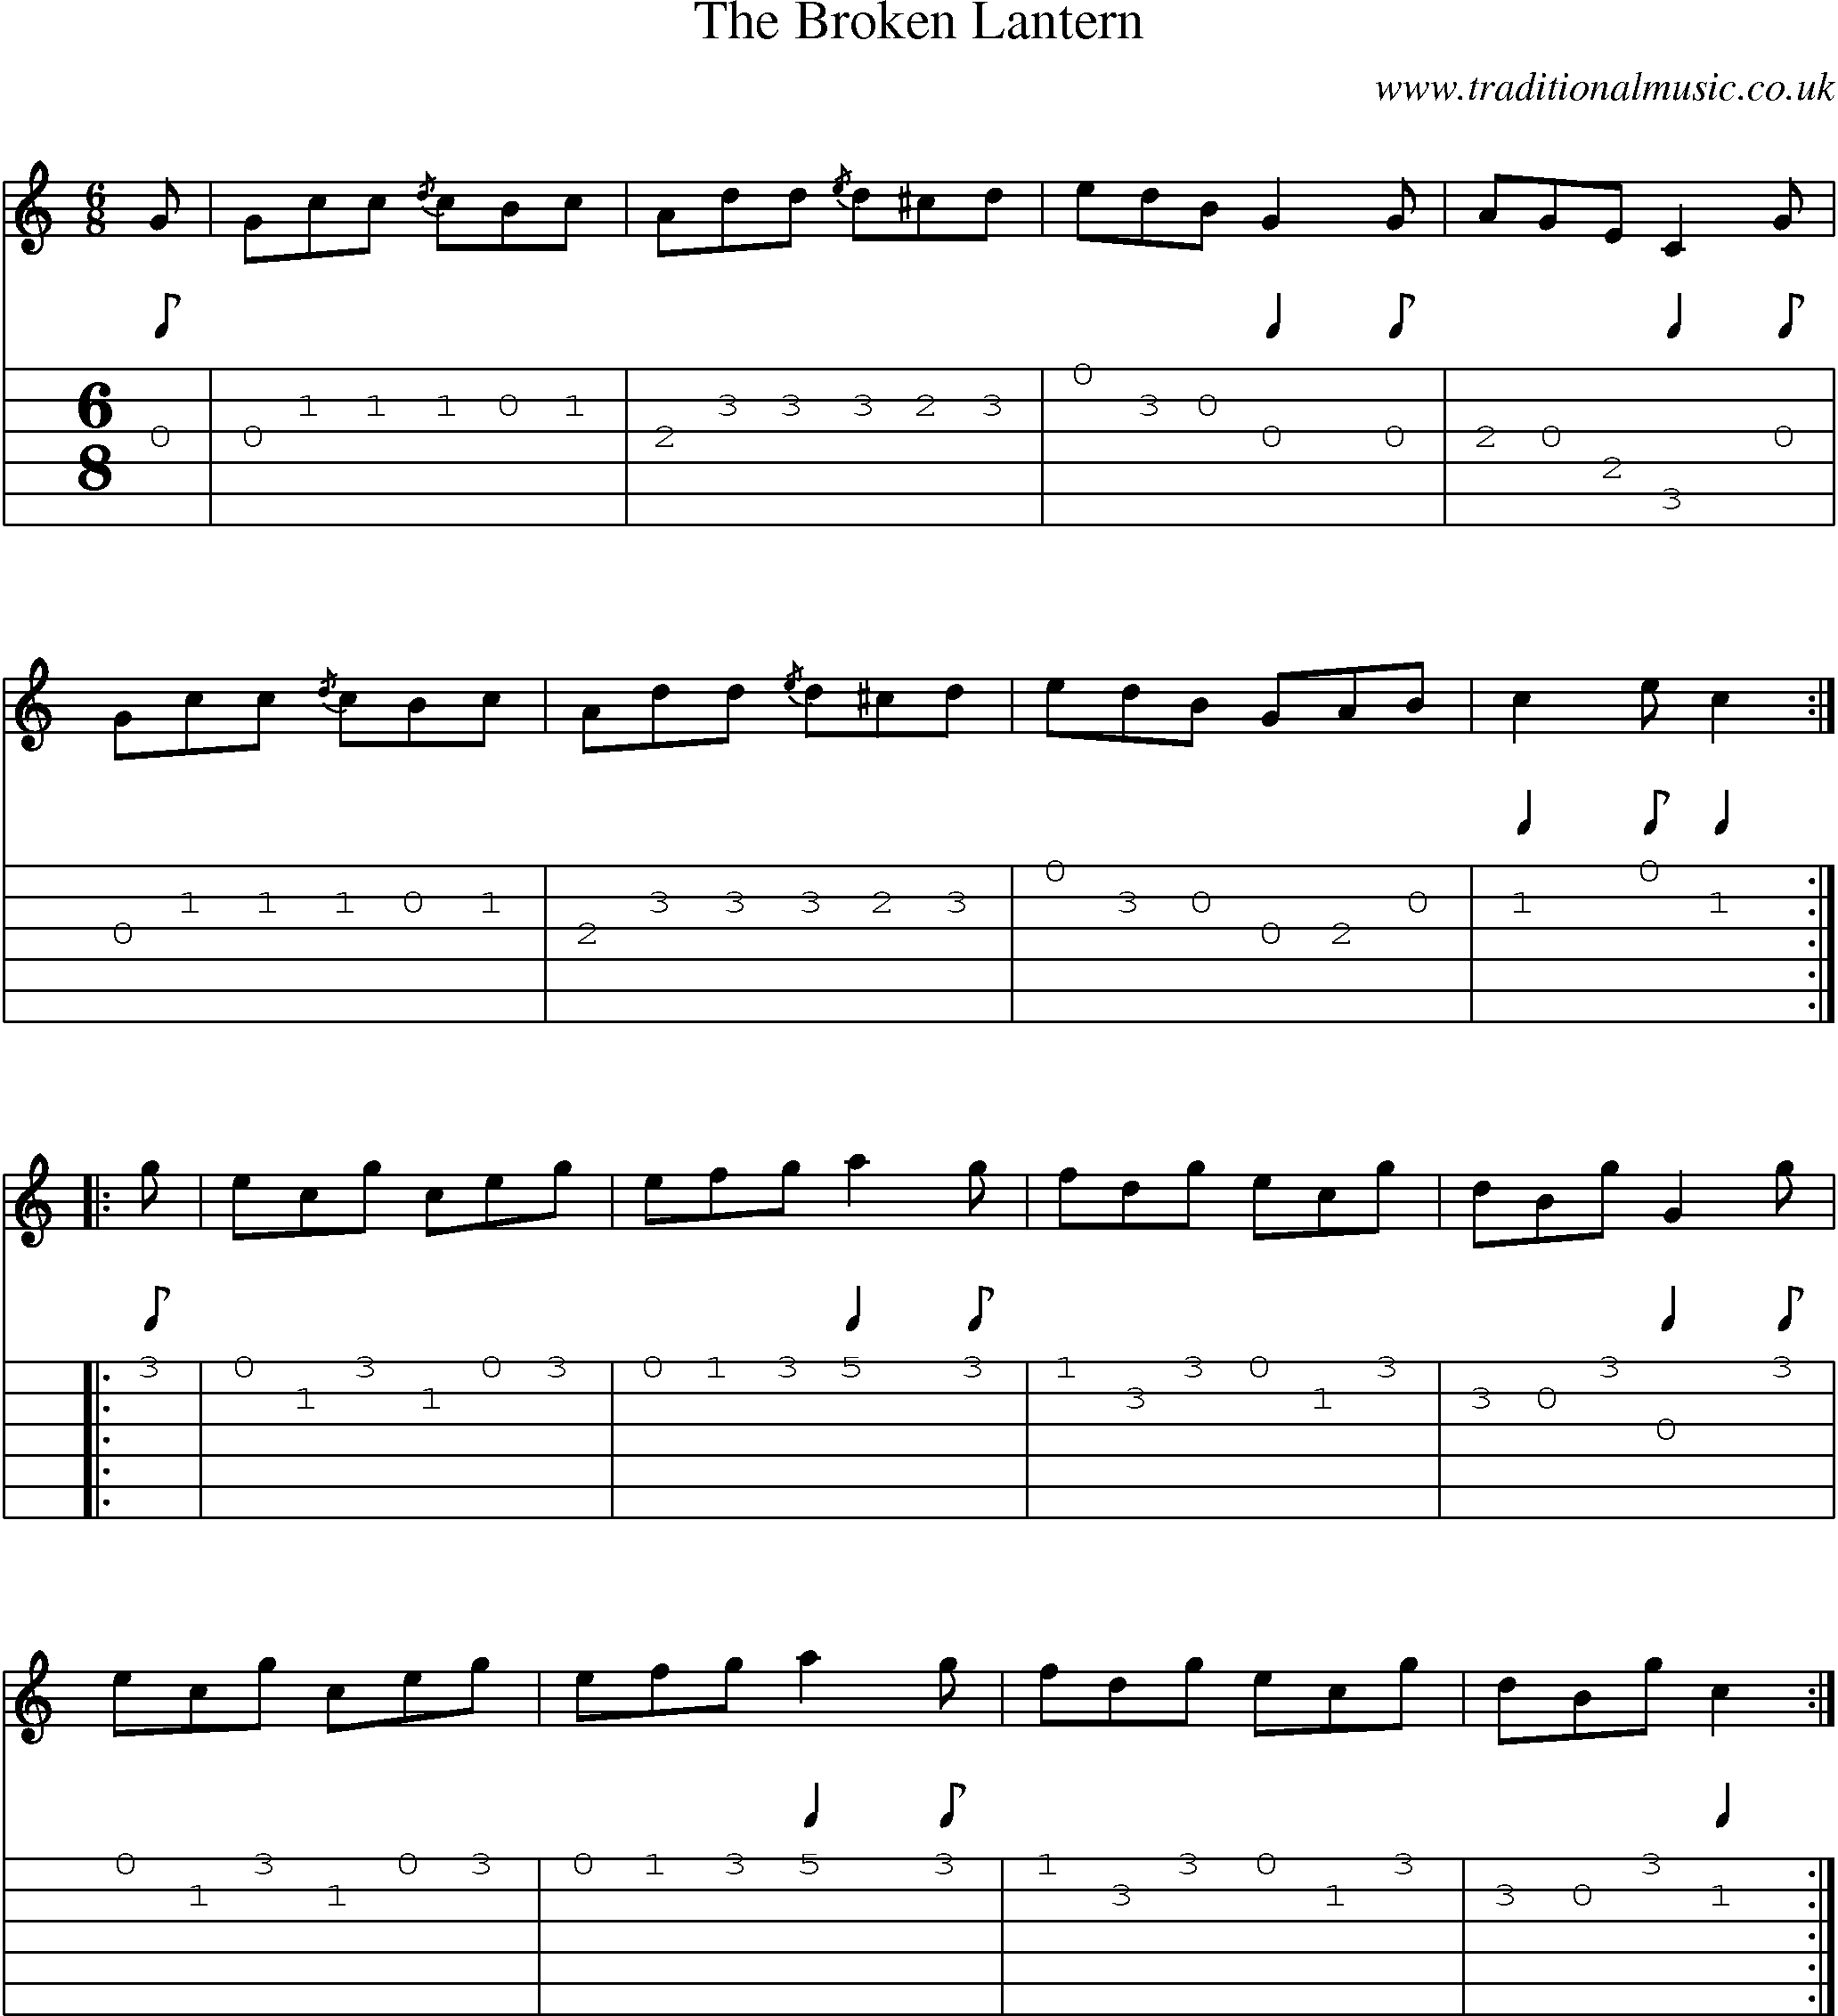 Music Score and Guitar Tabs for The Broken Lantern